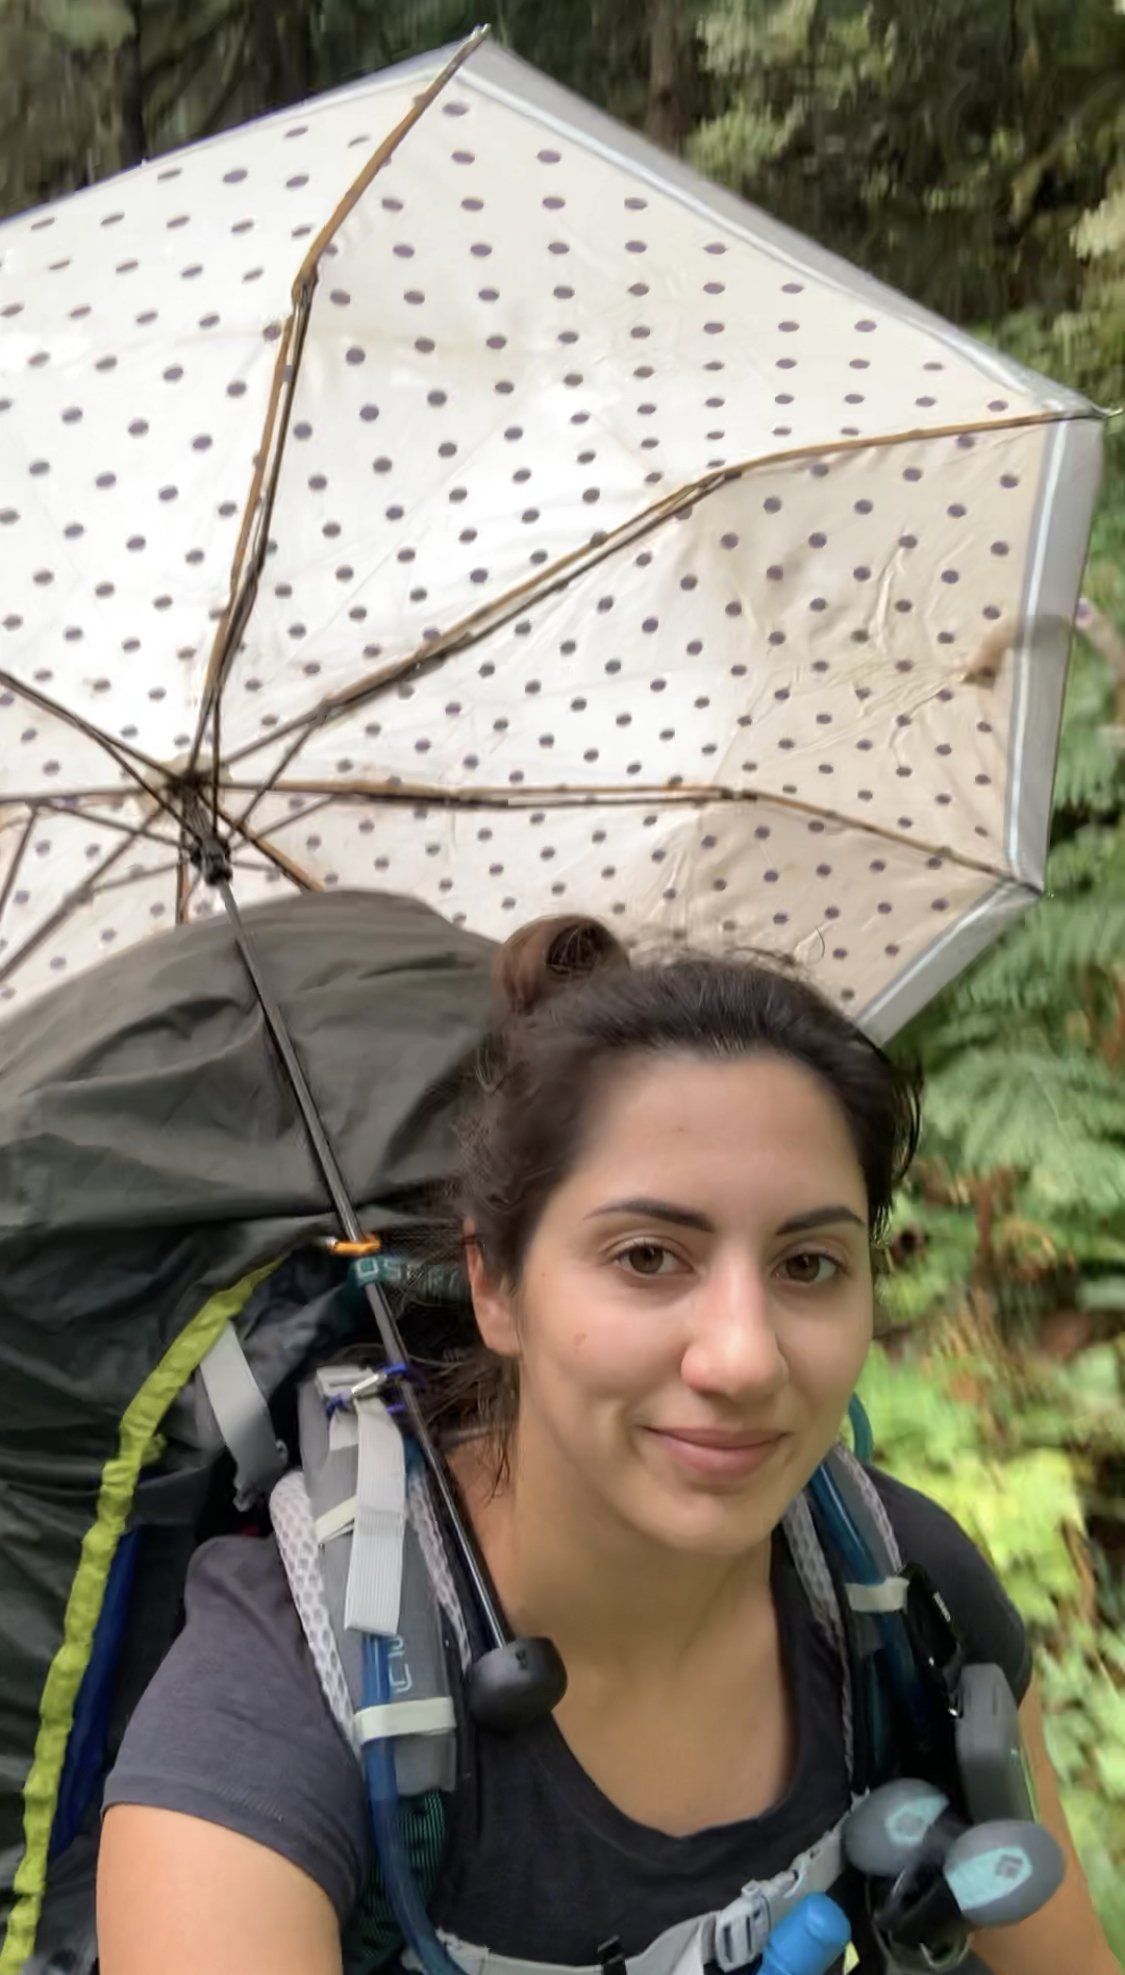 Hiking with umbrella at Golden Ears park, BC, Canada